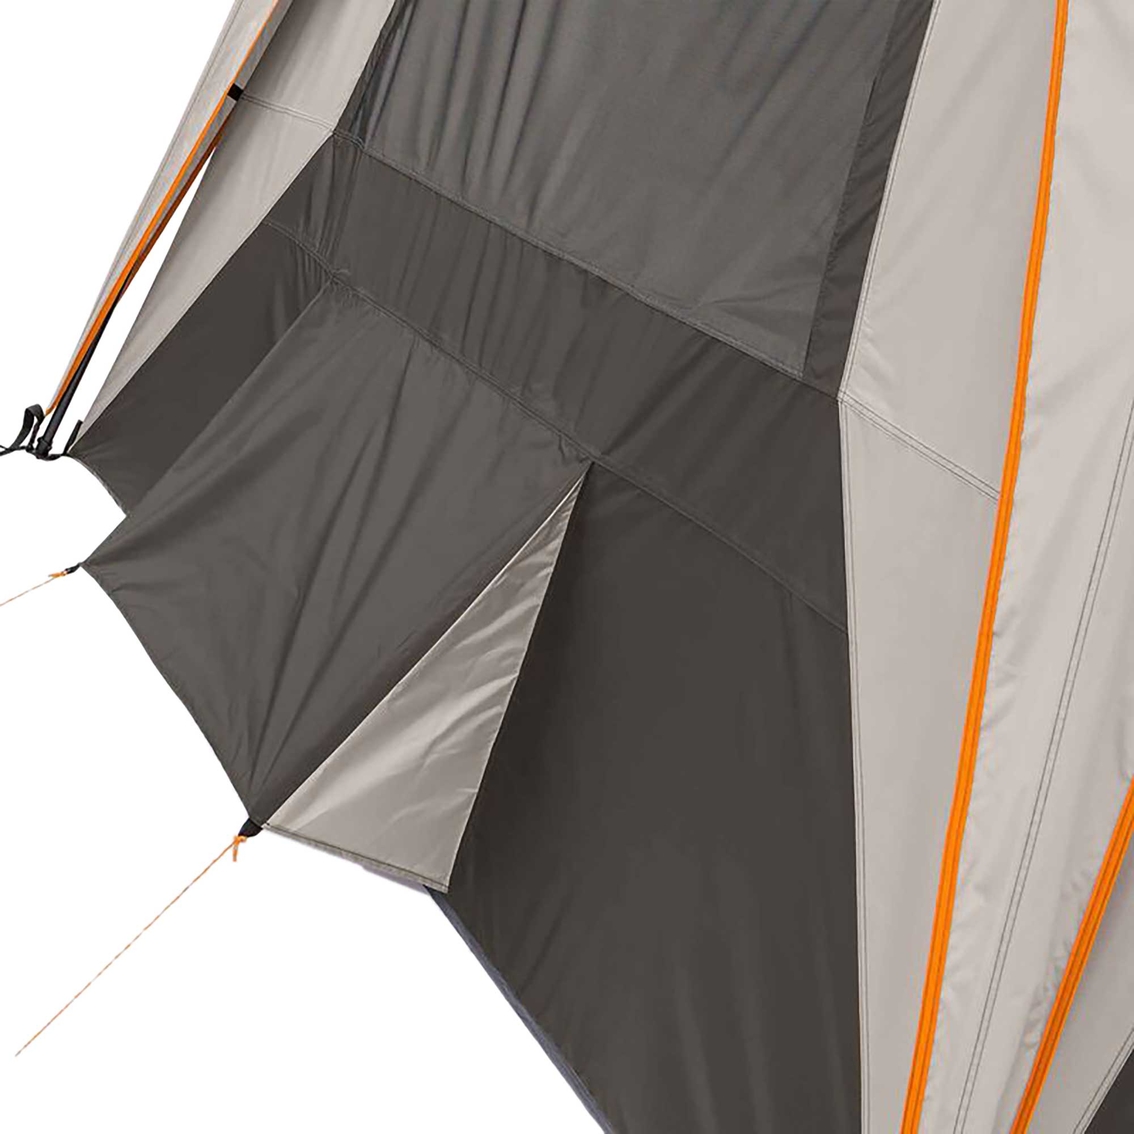 Bushnell 12P Outdoorsman Instant Cabin Tent - Image 5 of 10